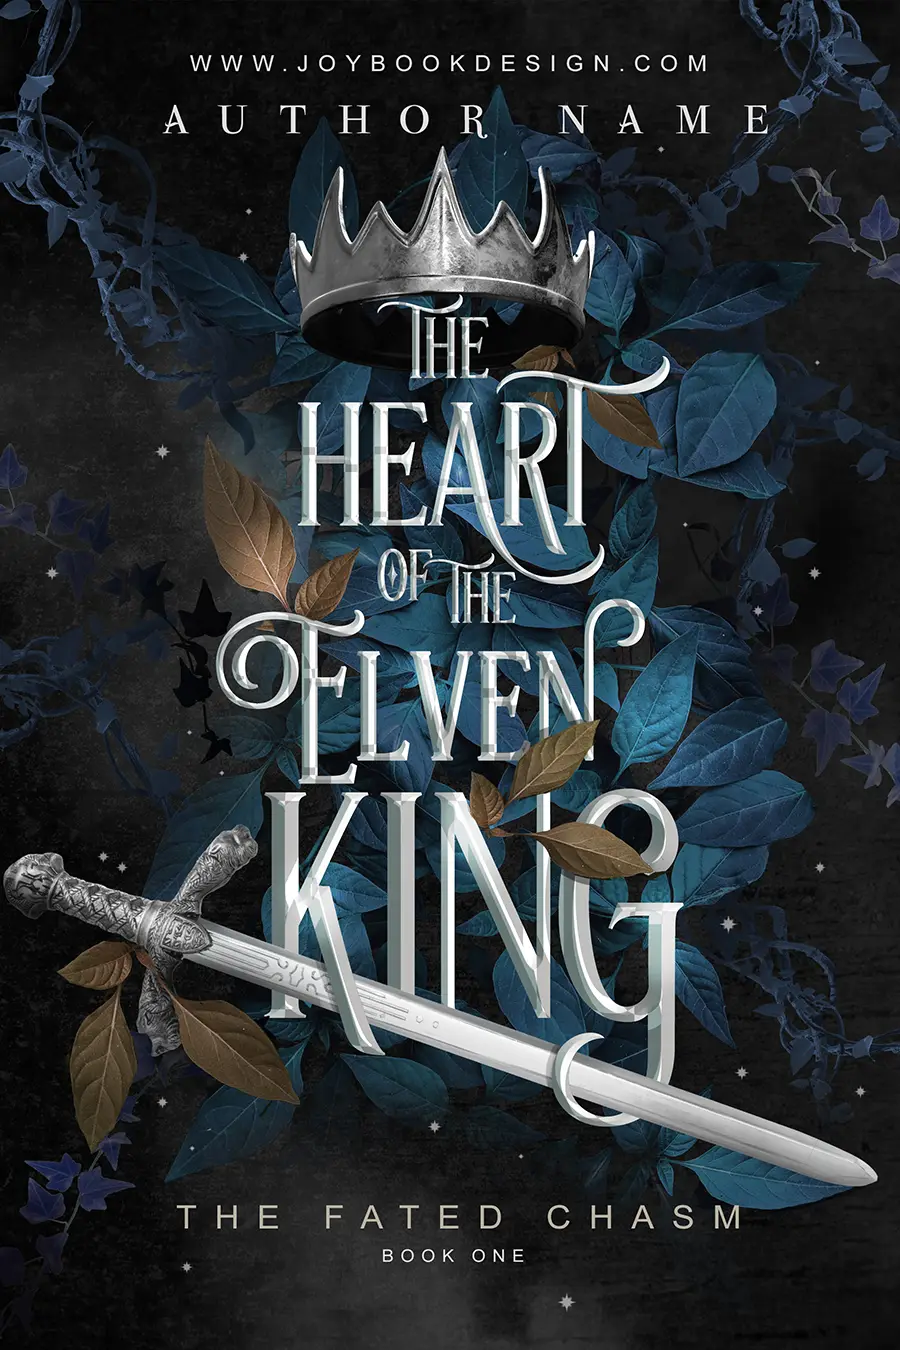 The Heart of the Elven King